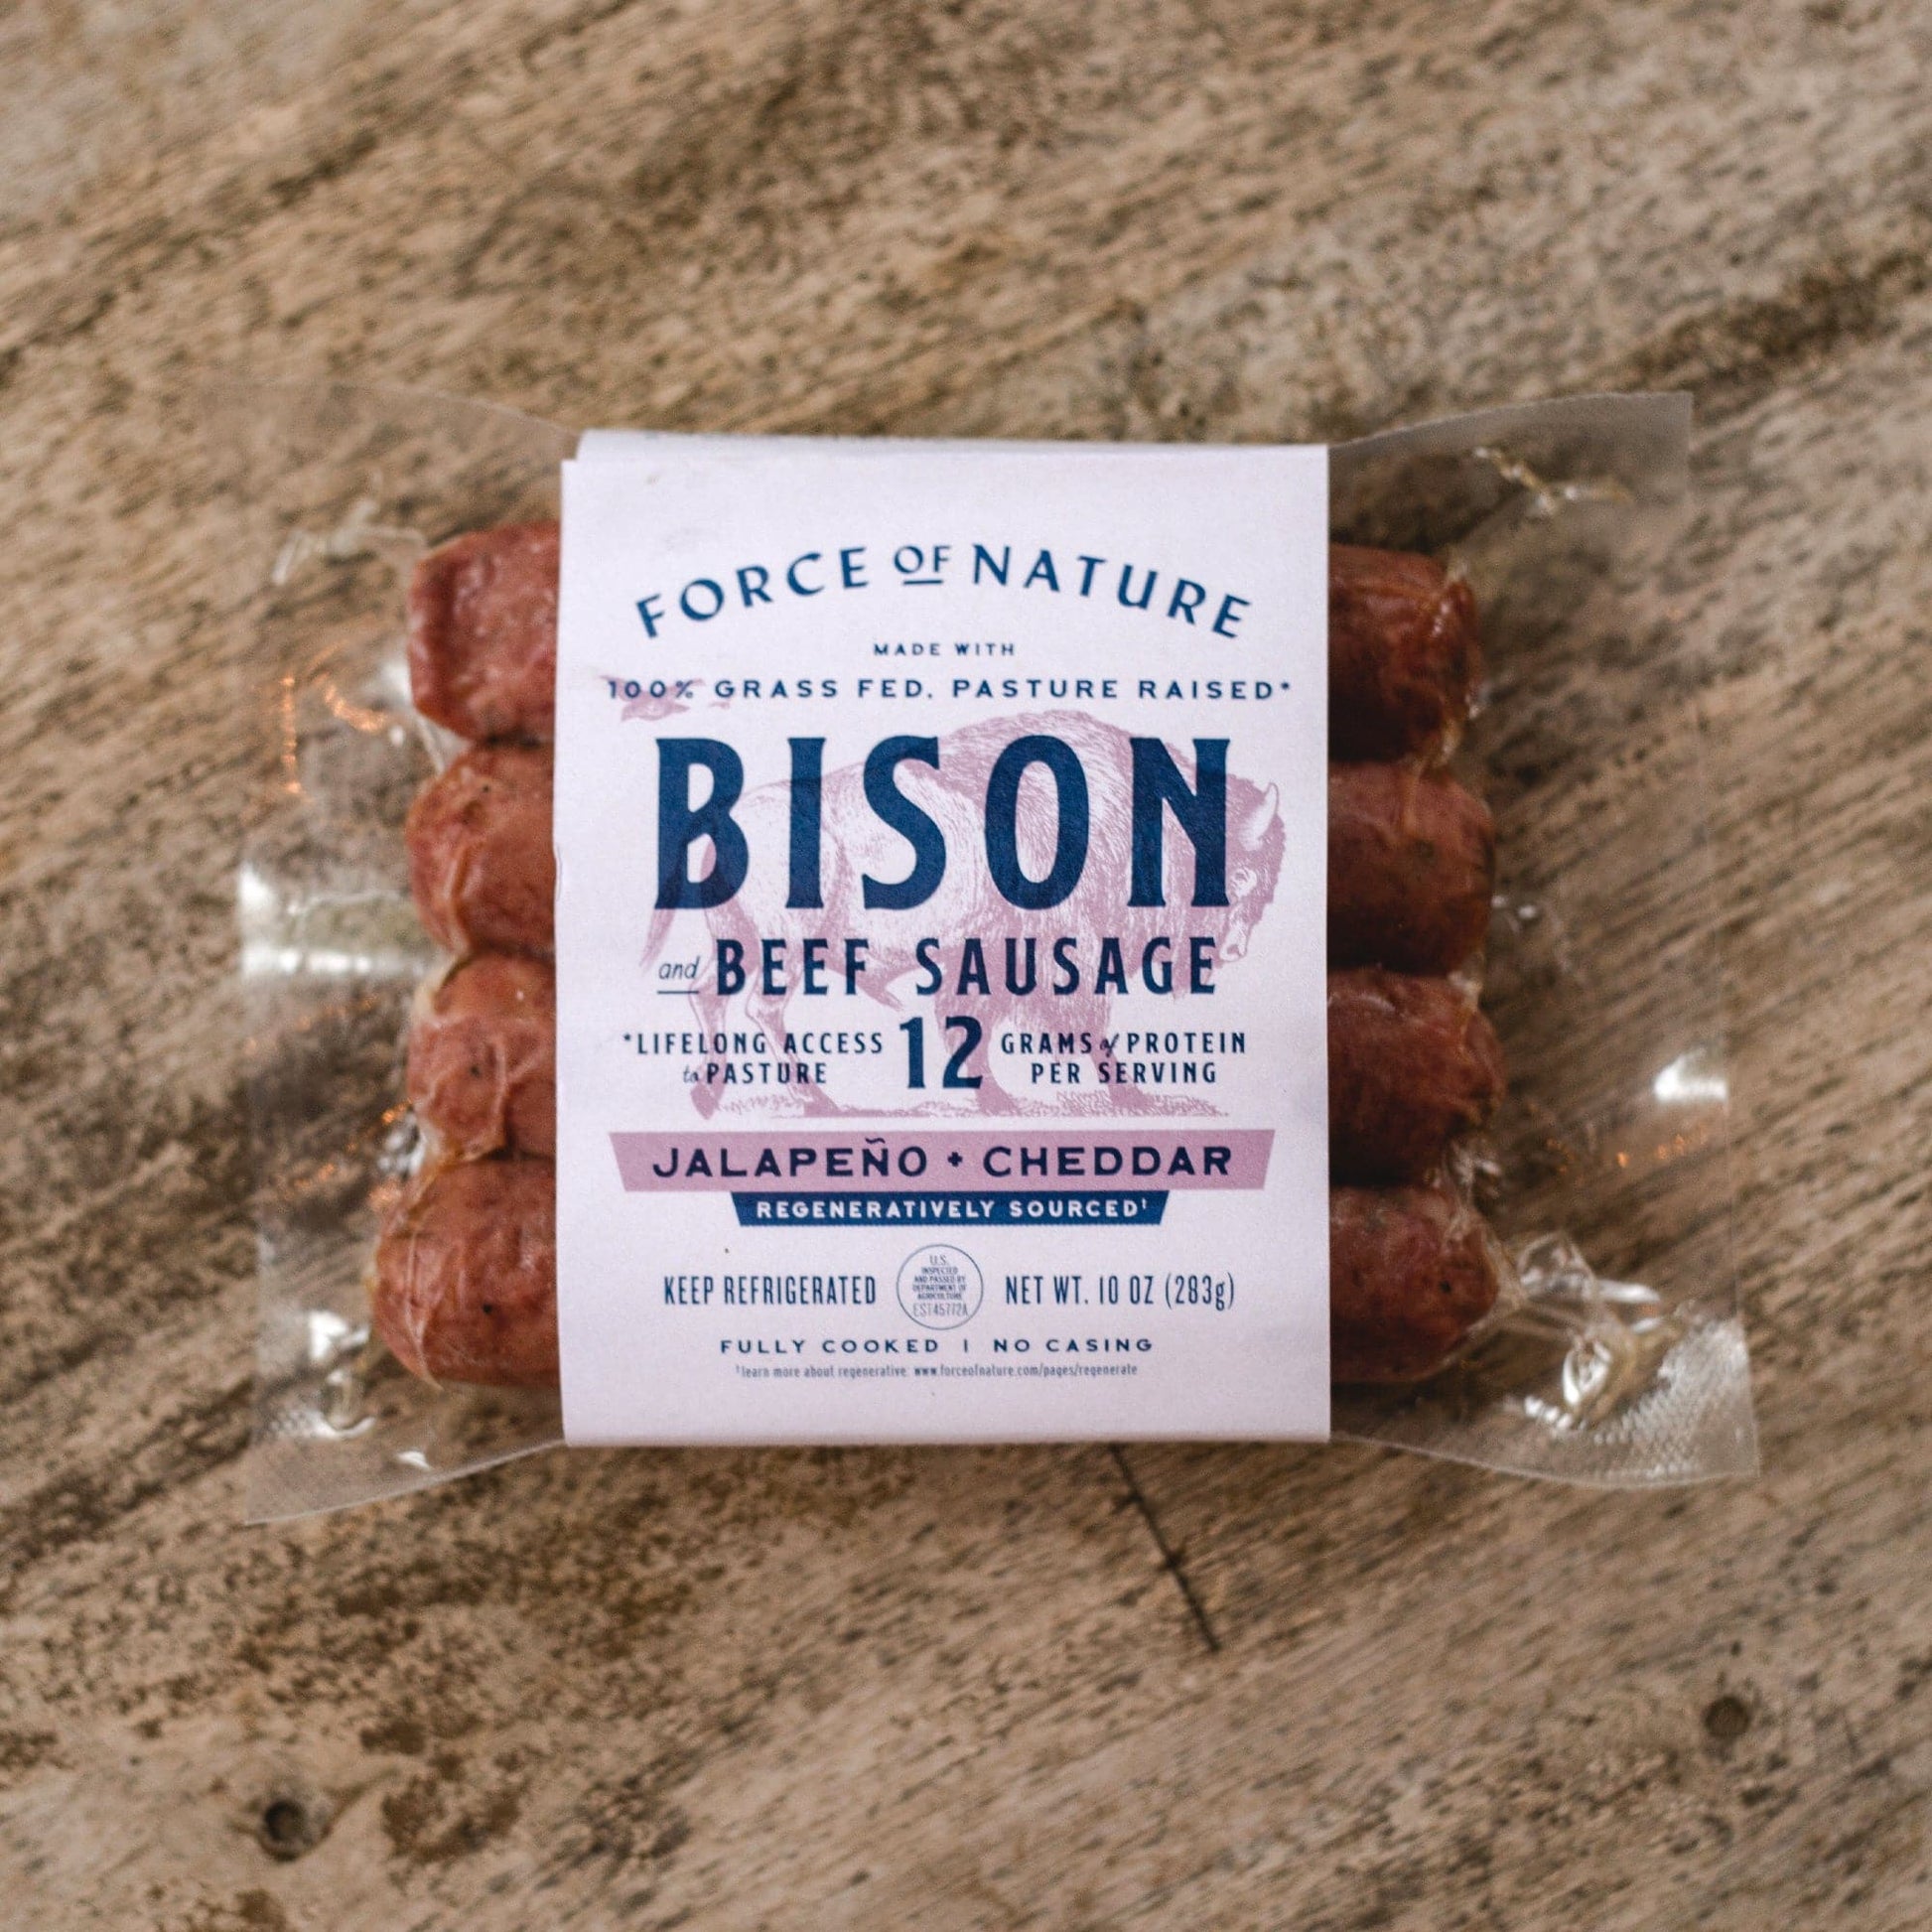 Bison & Beef sausage package on a wooden table.